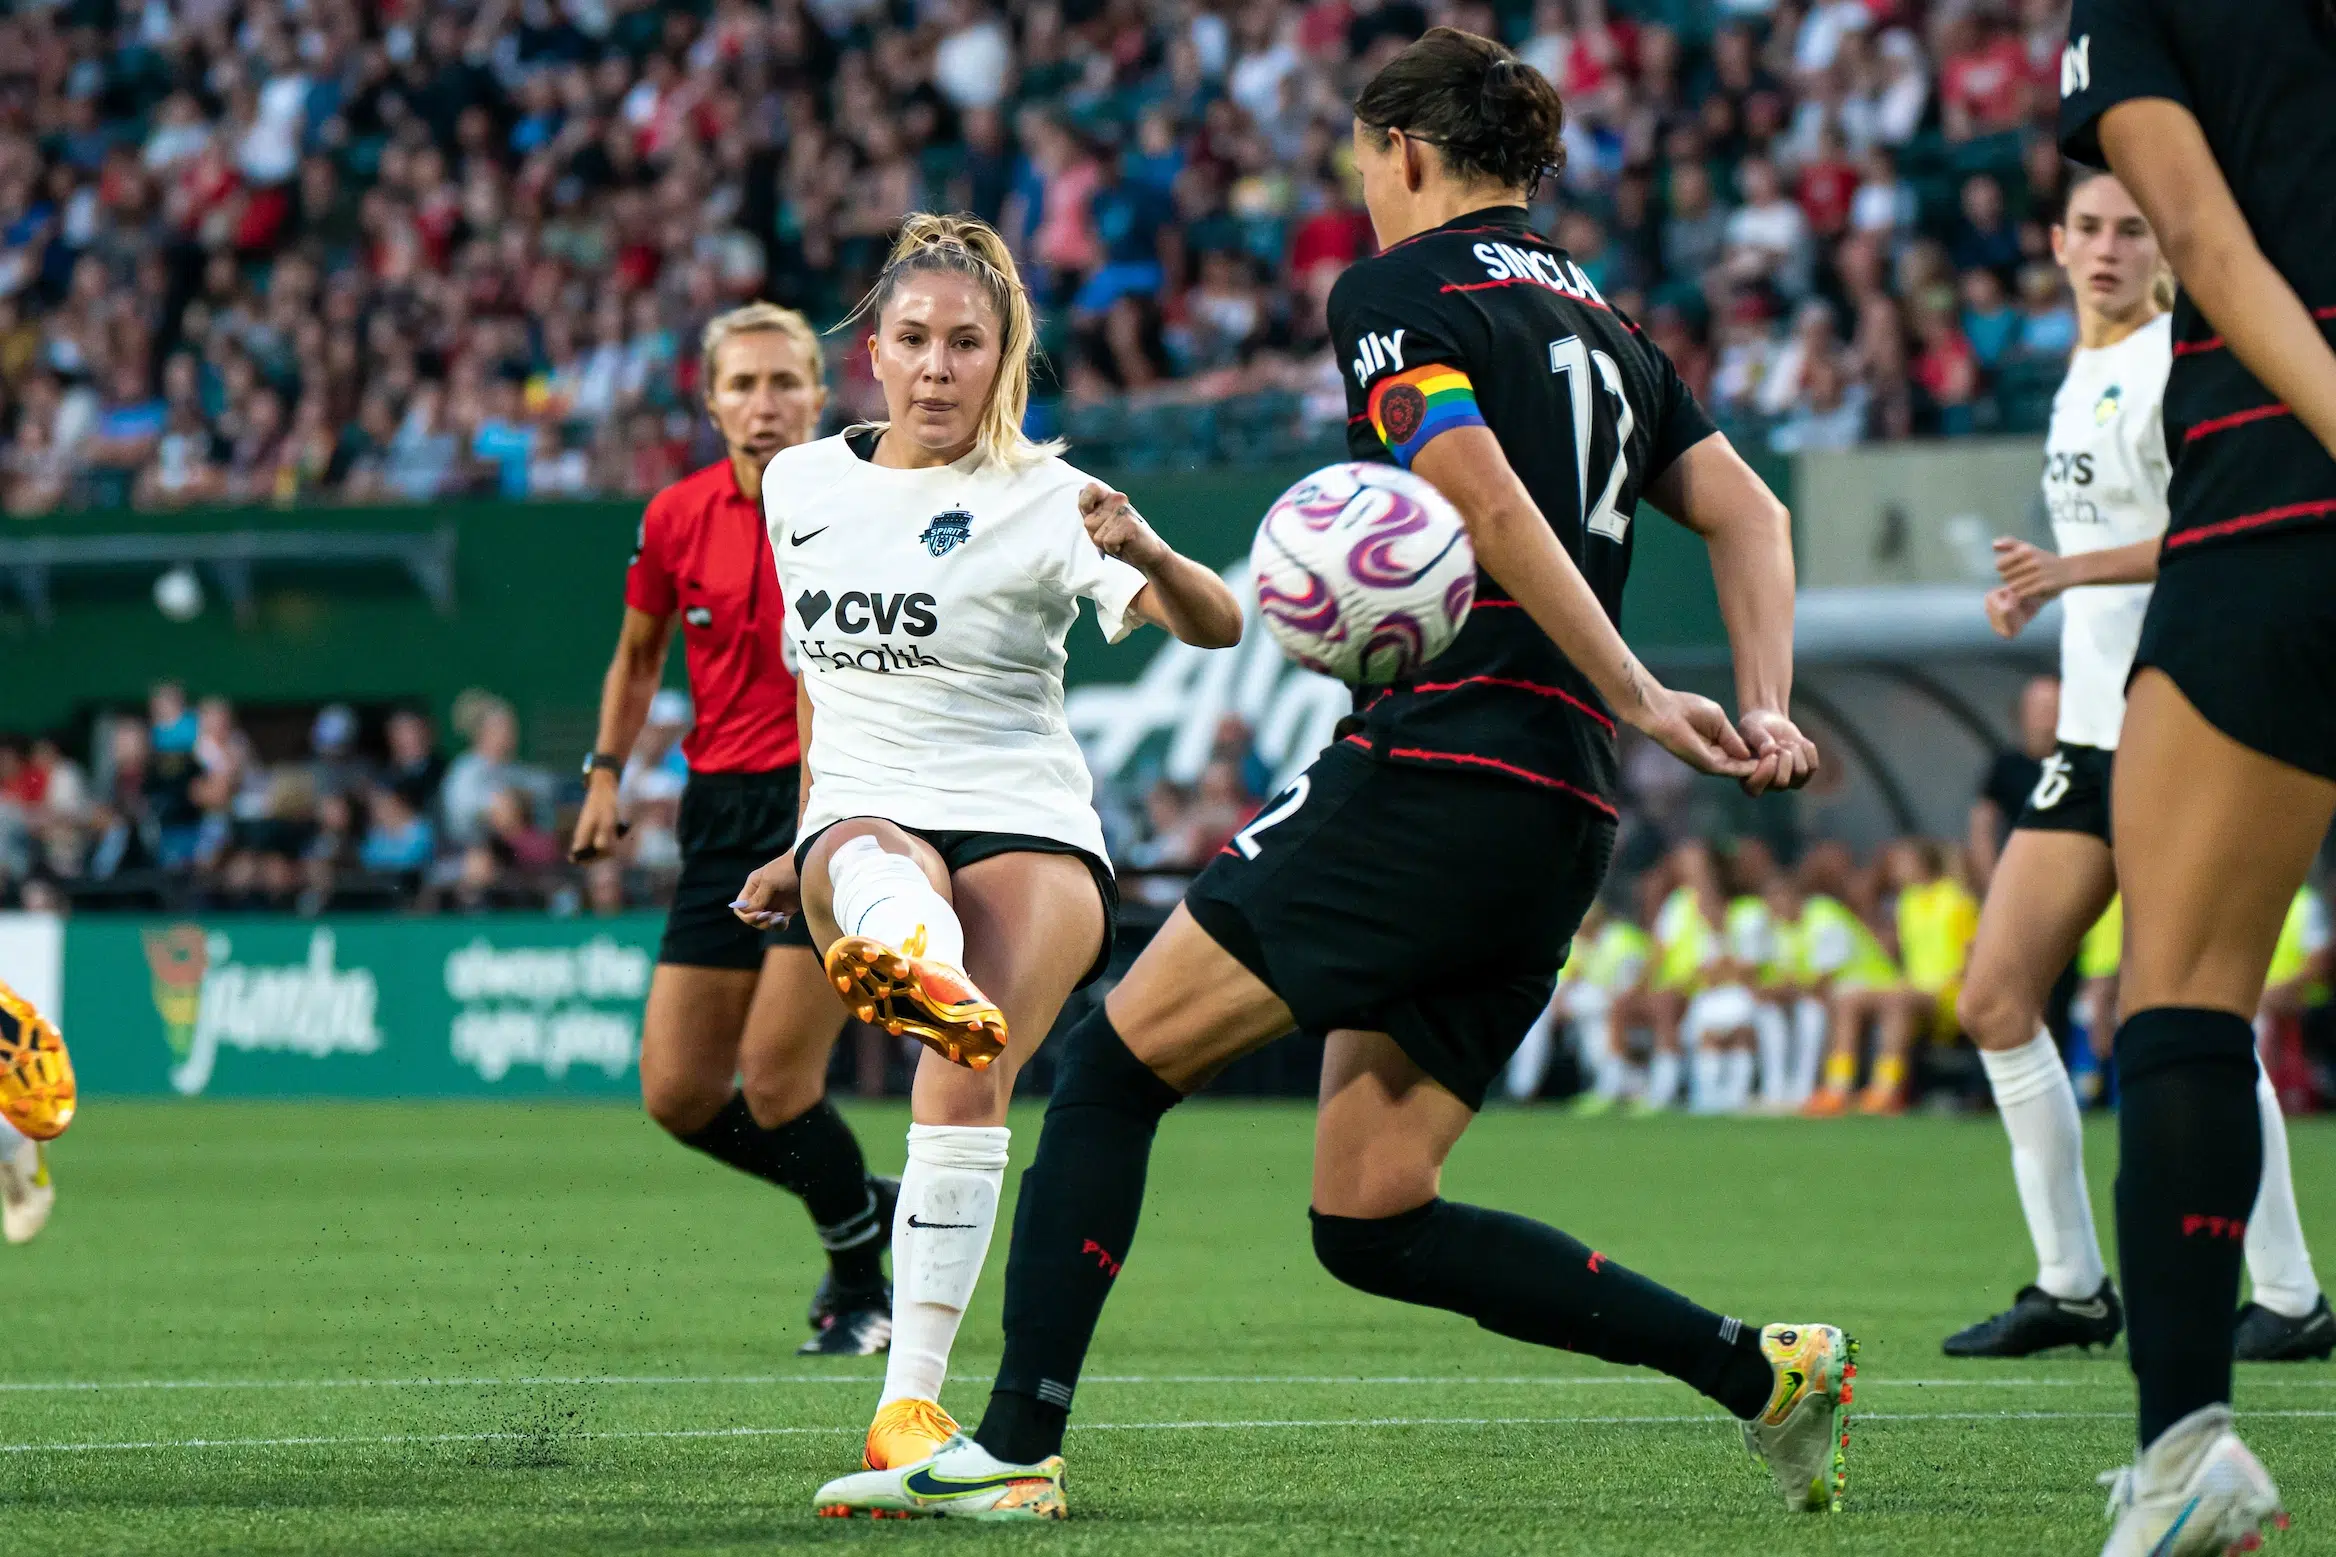 Ashley Sanchez in a white top, black shorts and white socks shoots the ball passed Christine Sinclair in a black uniform.